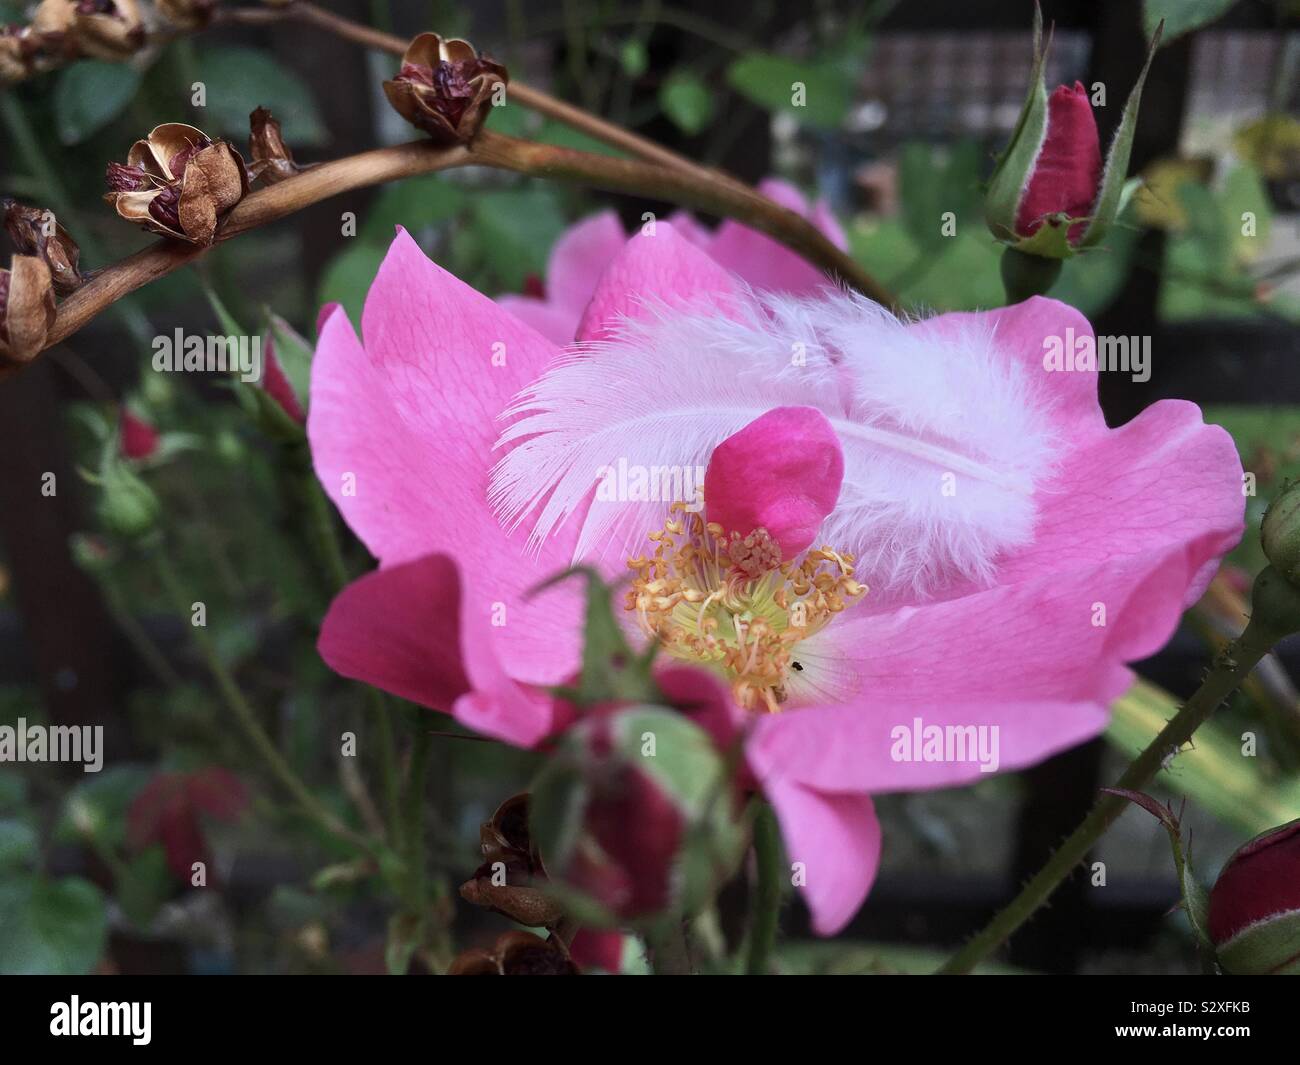 A white fluffy feather cusps in a pink rose in our garden. Stock Photo